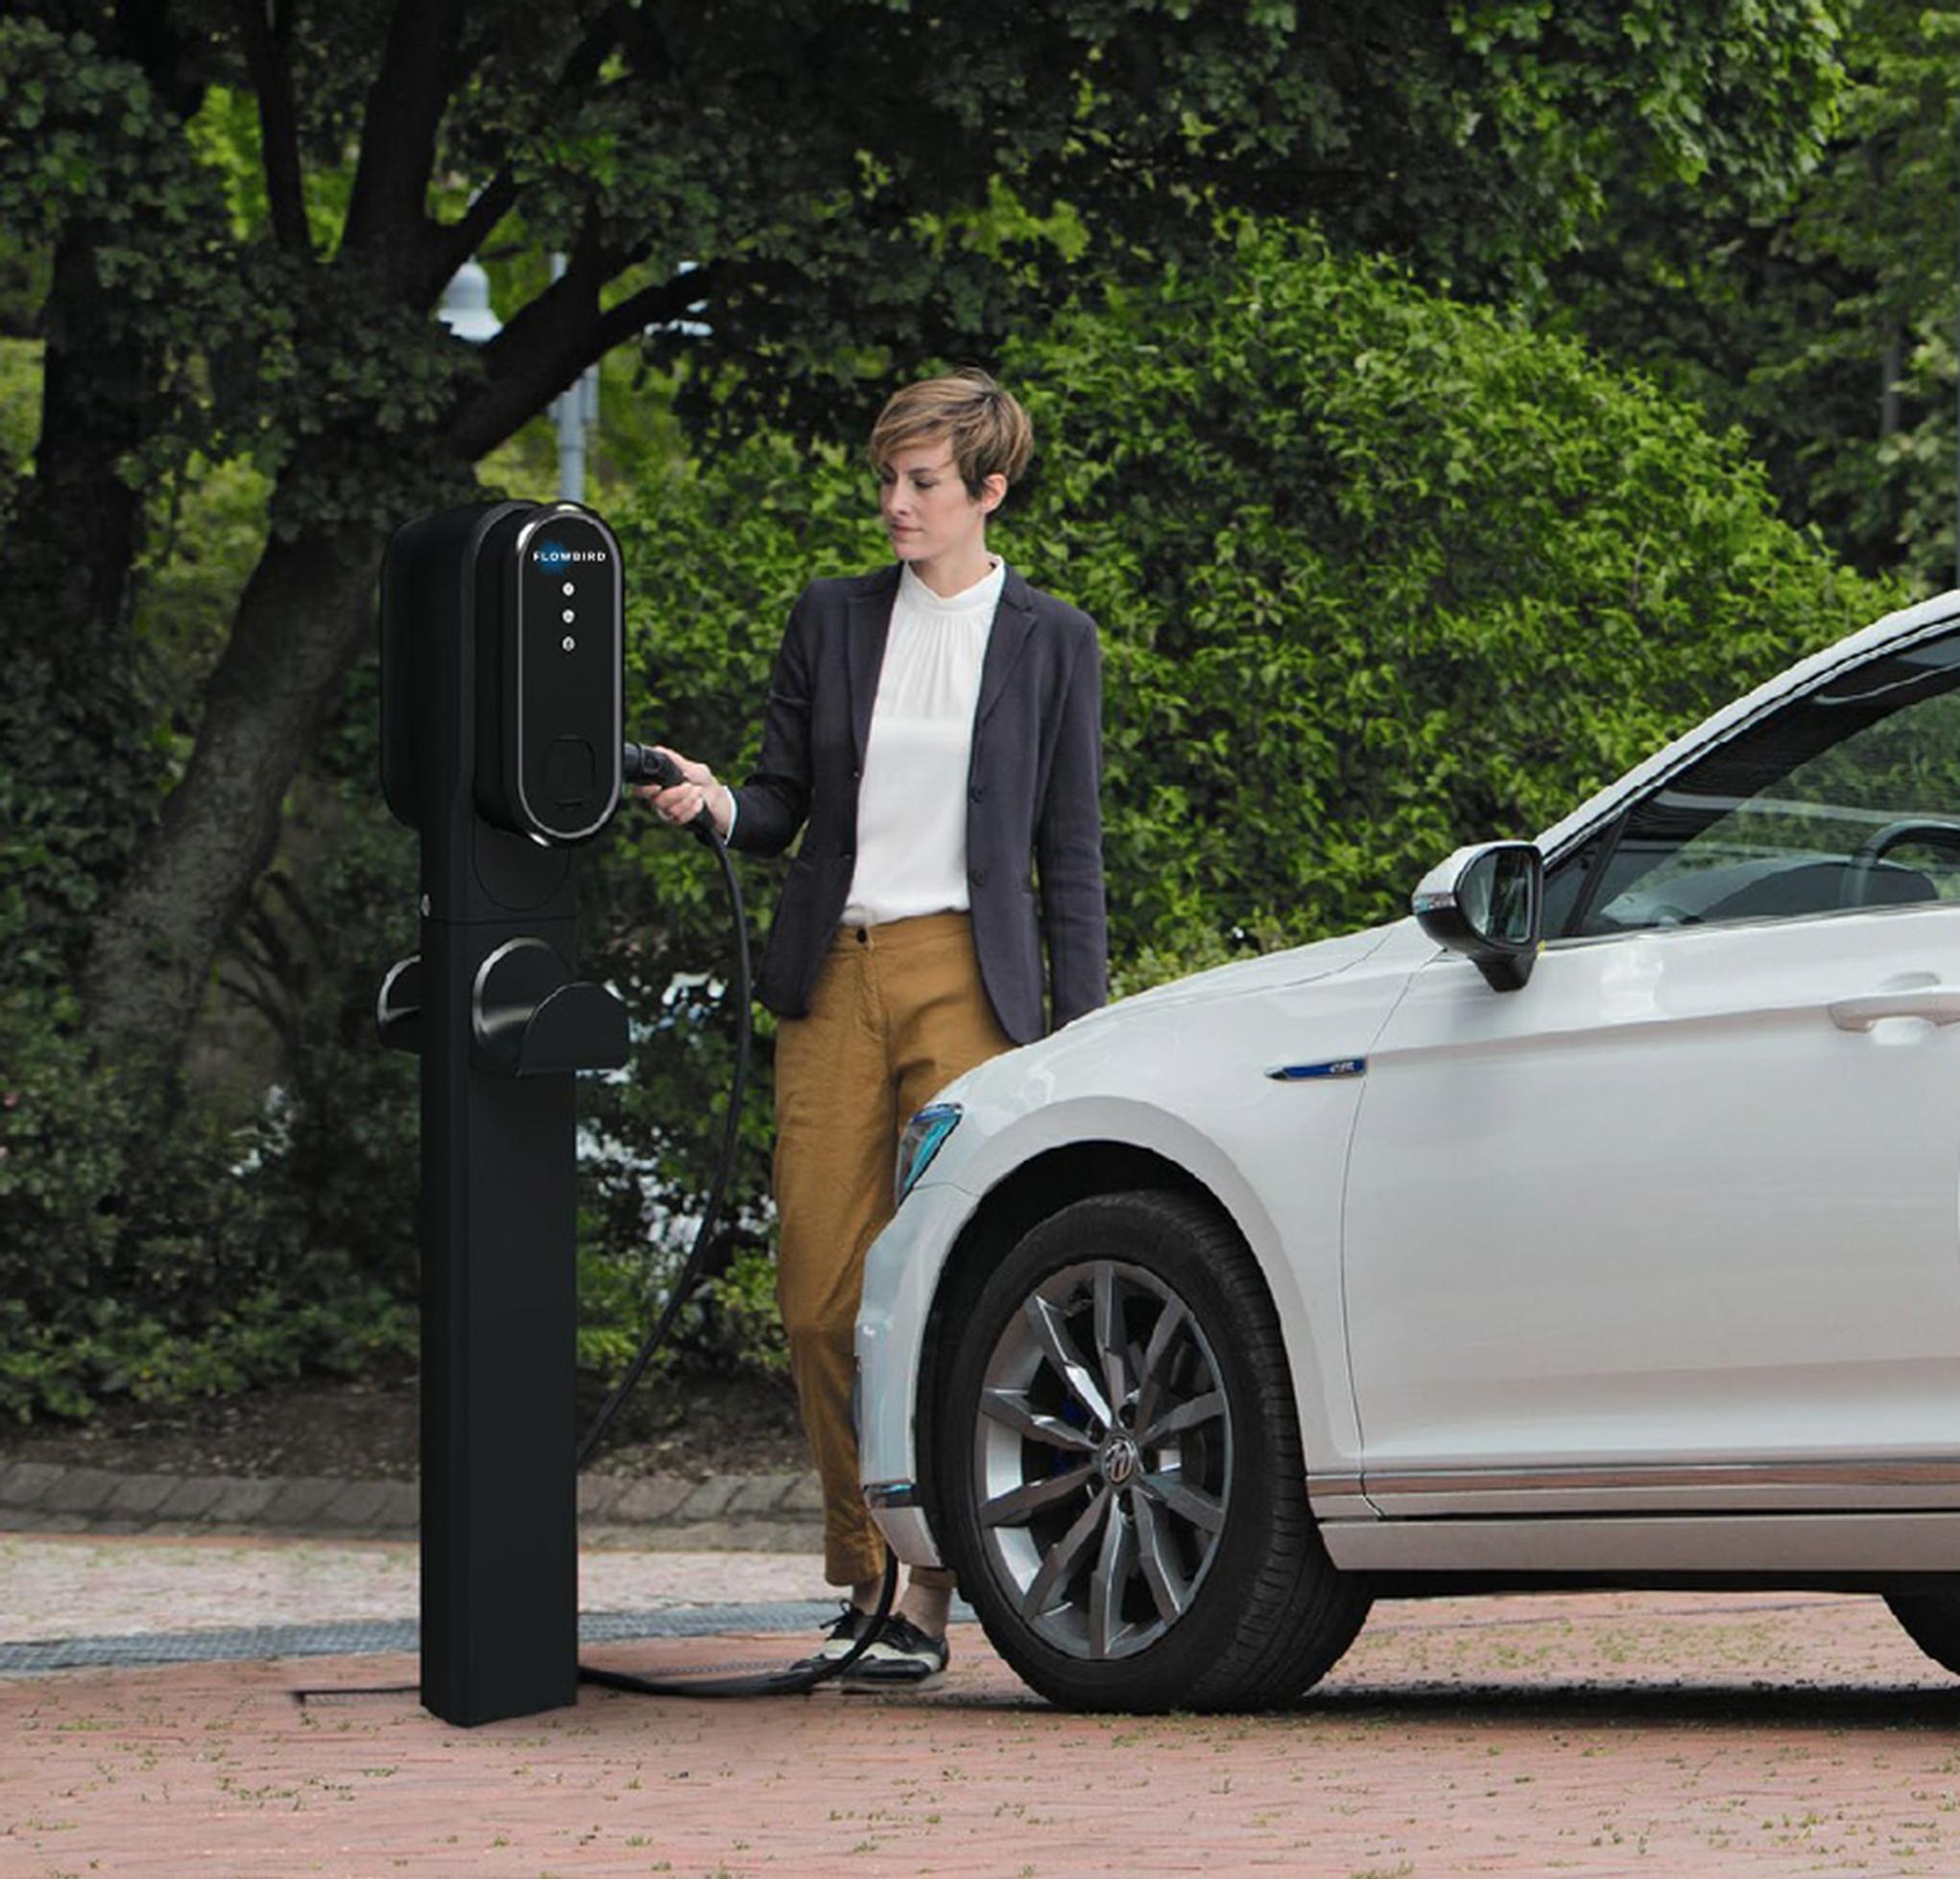 52% of respondents to the Flowbird survey said more parking spaces should have EV charging points